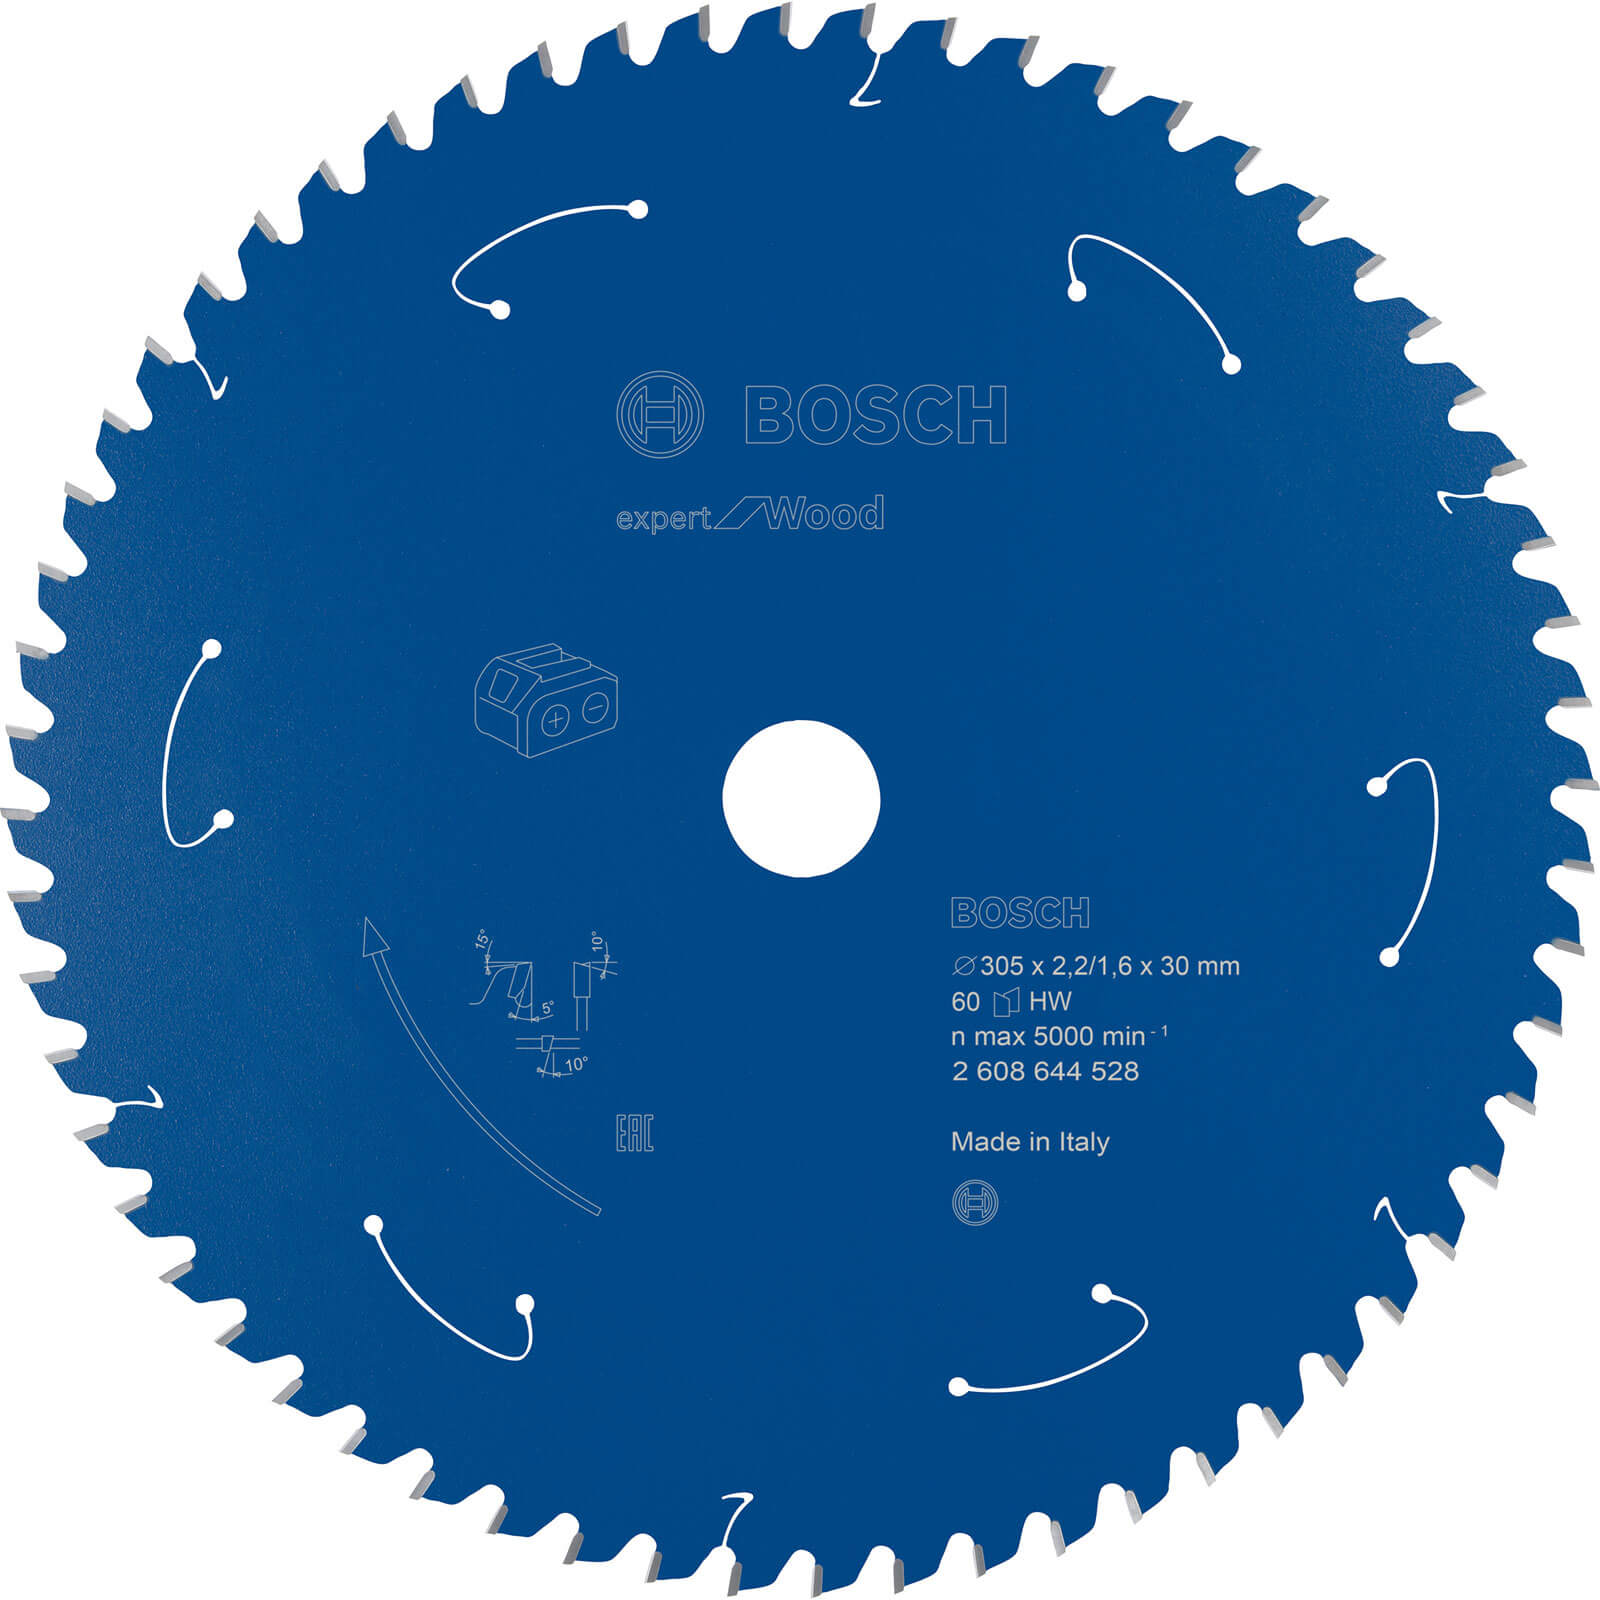 Photo of Bosch Expert Wood Cutting Cordless Mitre Saw Blade 305mm 60t 30mm